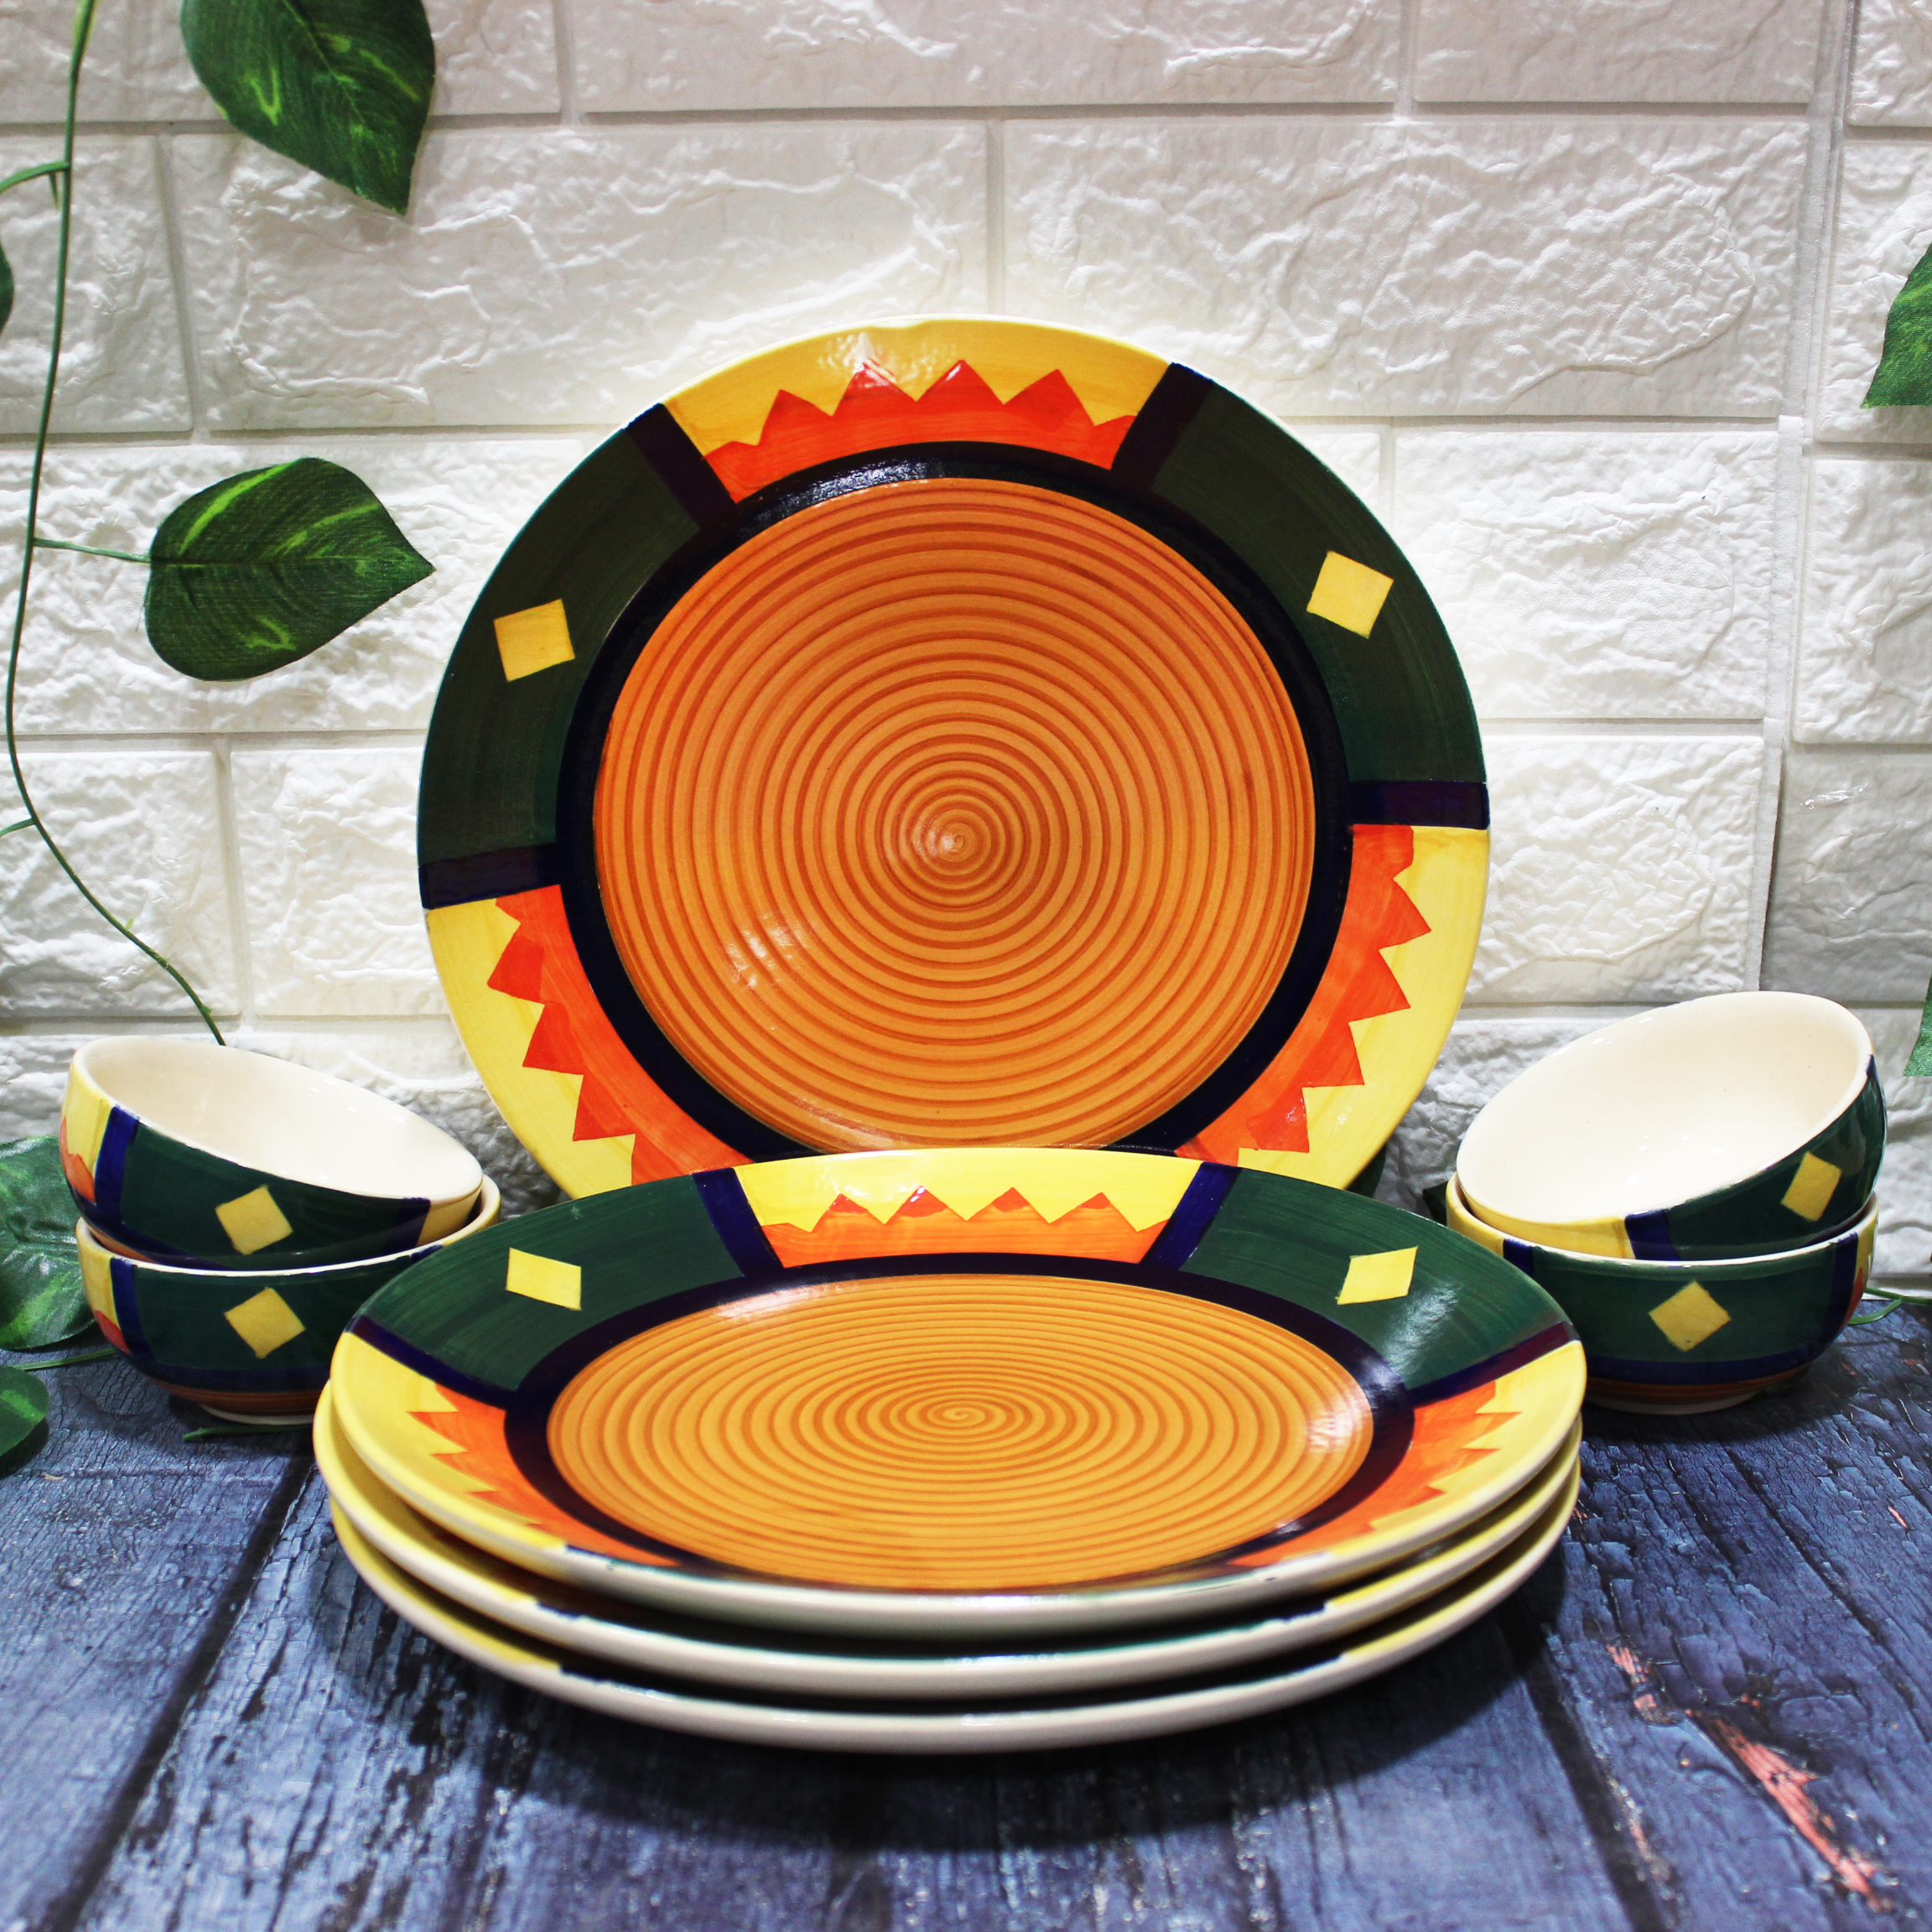 Hand-Painted Ceramic Dinner Plates With Katoris (8 Pieces, Serving for 4, Microwave  Safe)